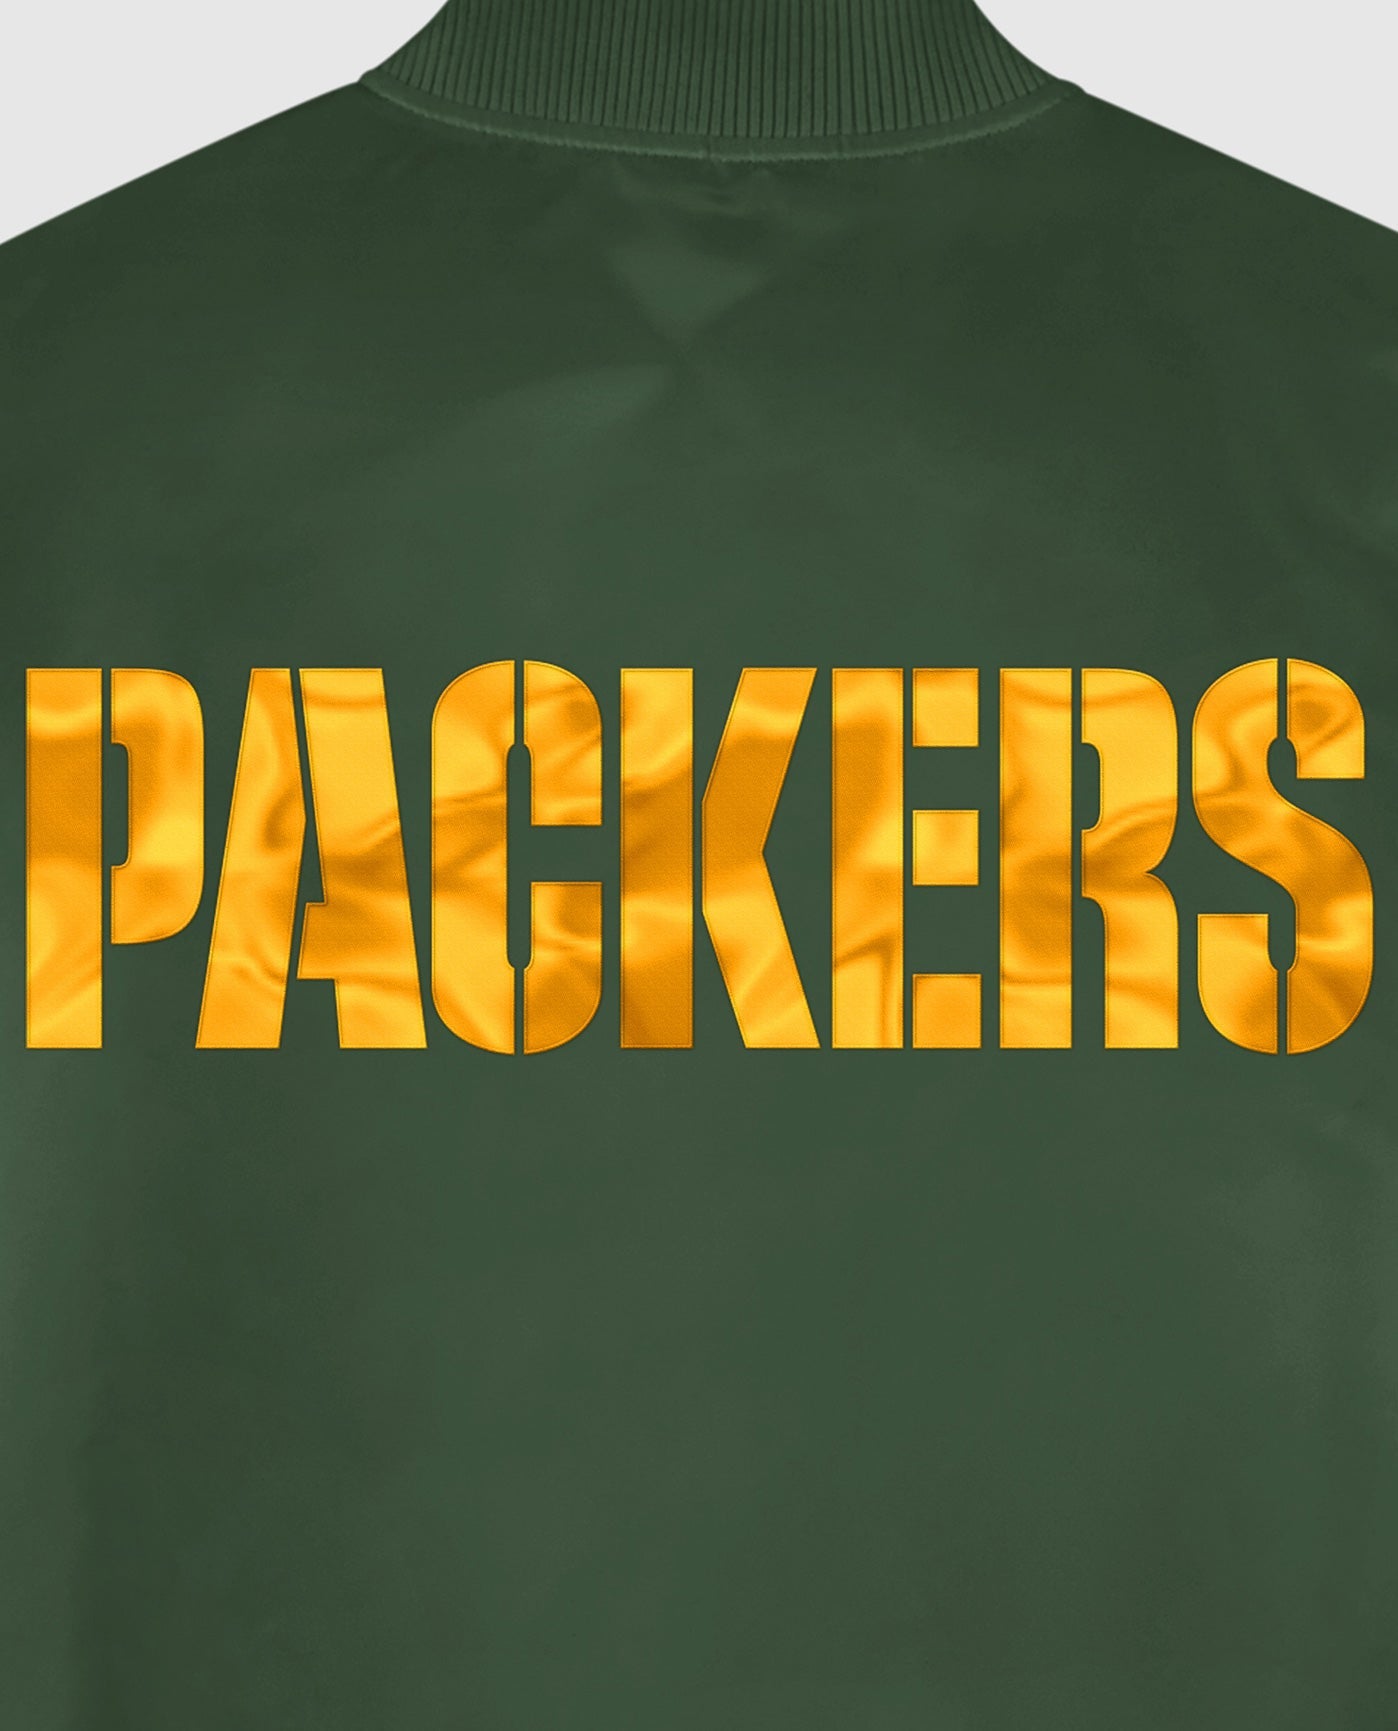 Green Bay Packers Team Name Twill Applique | Packers Green